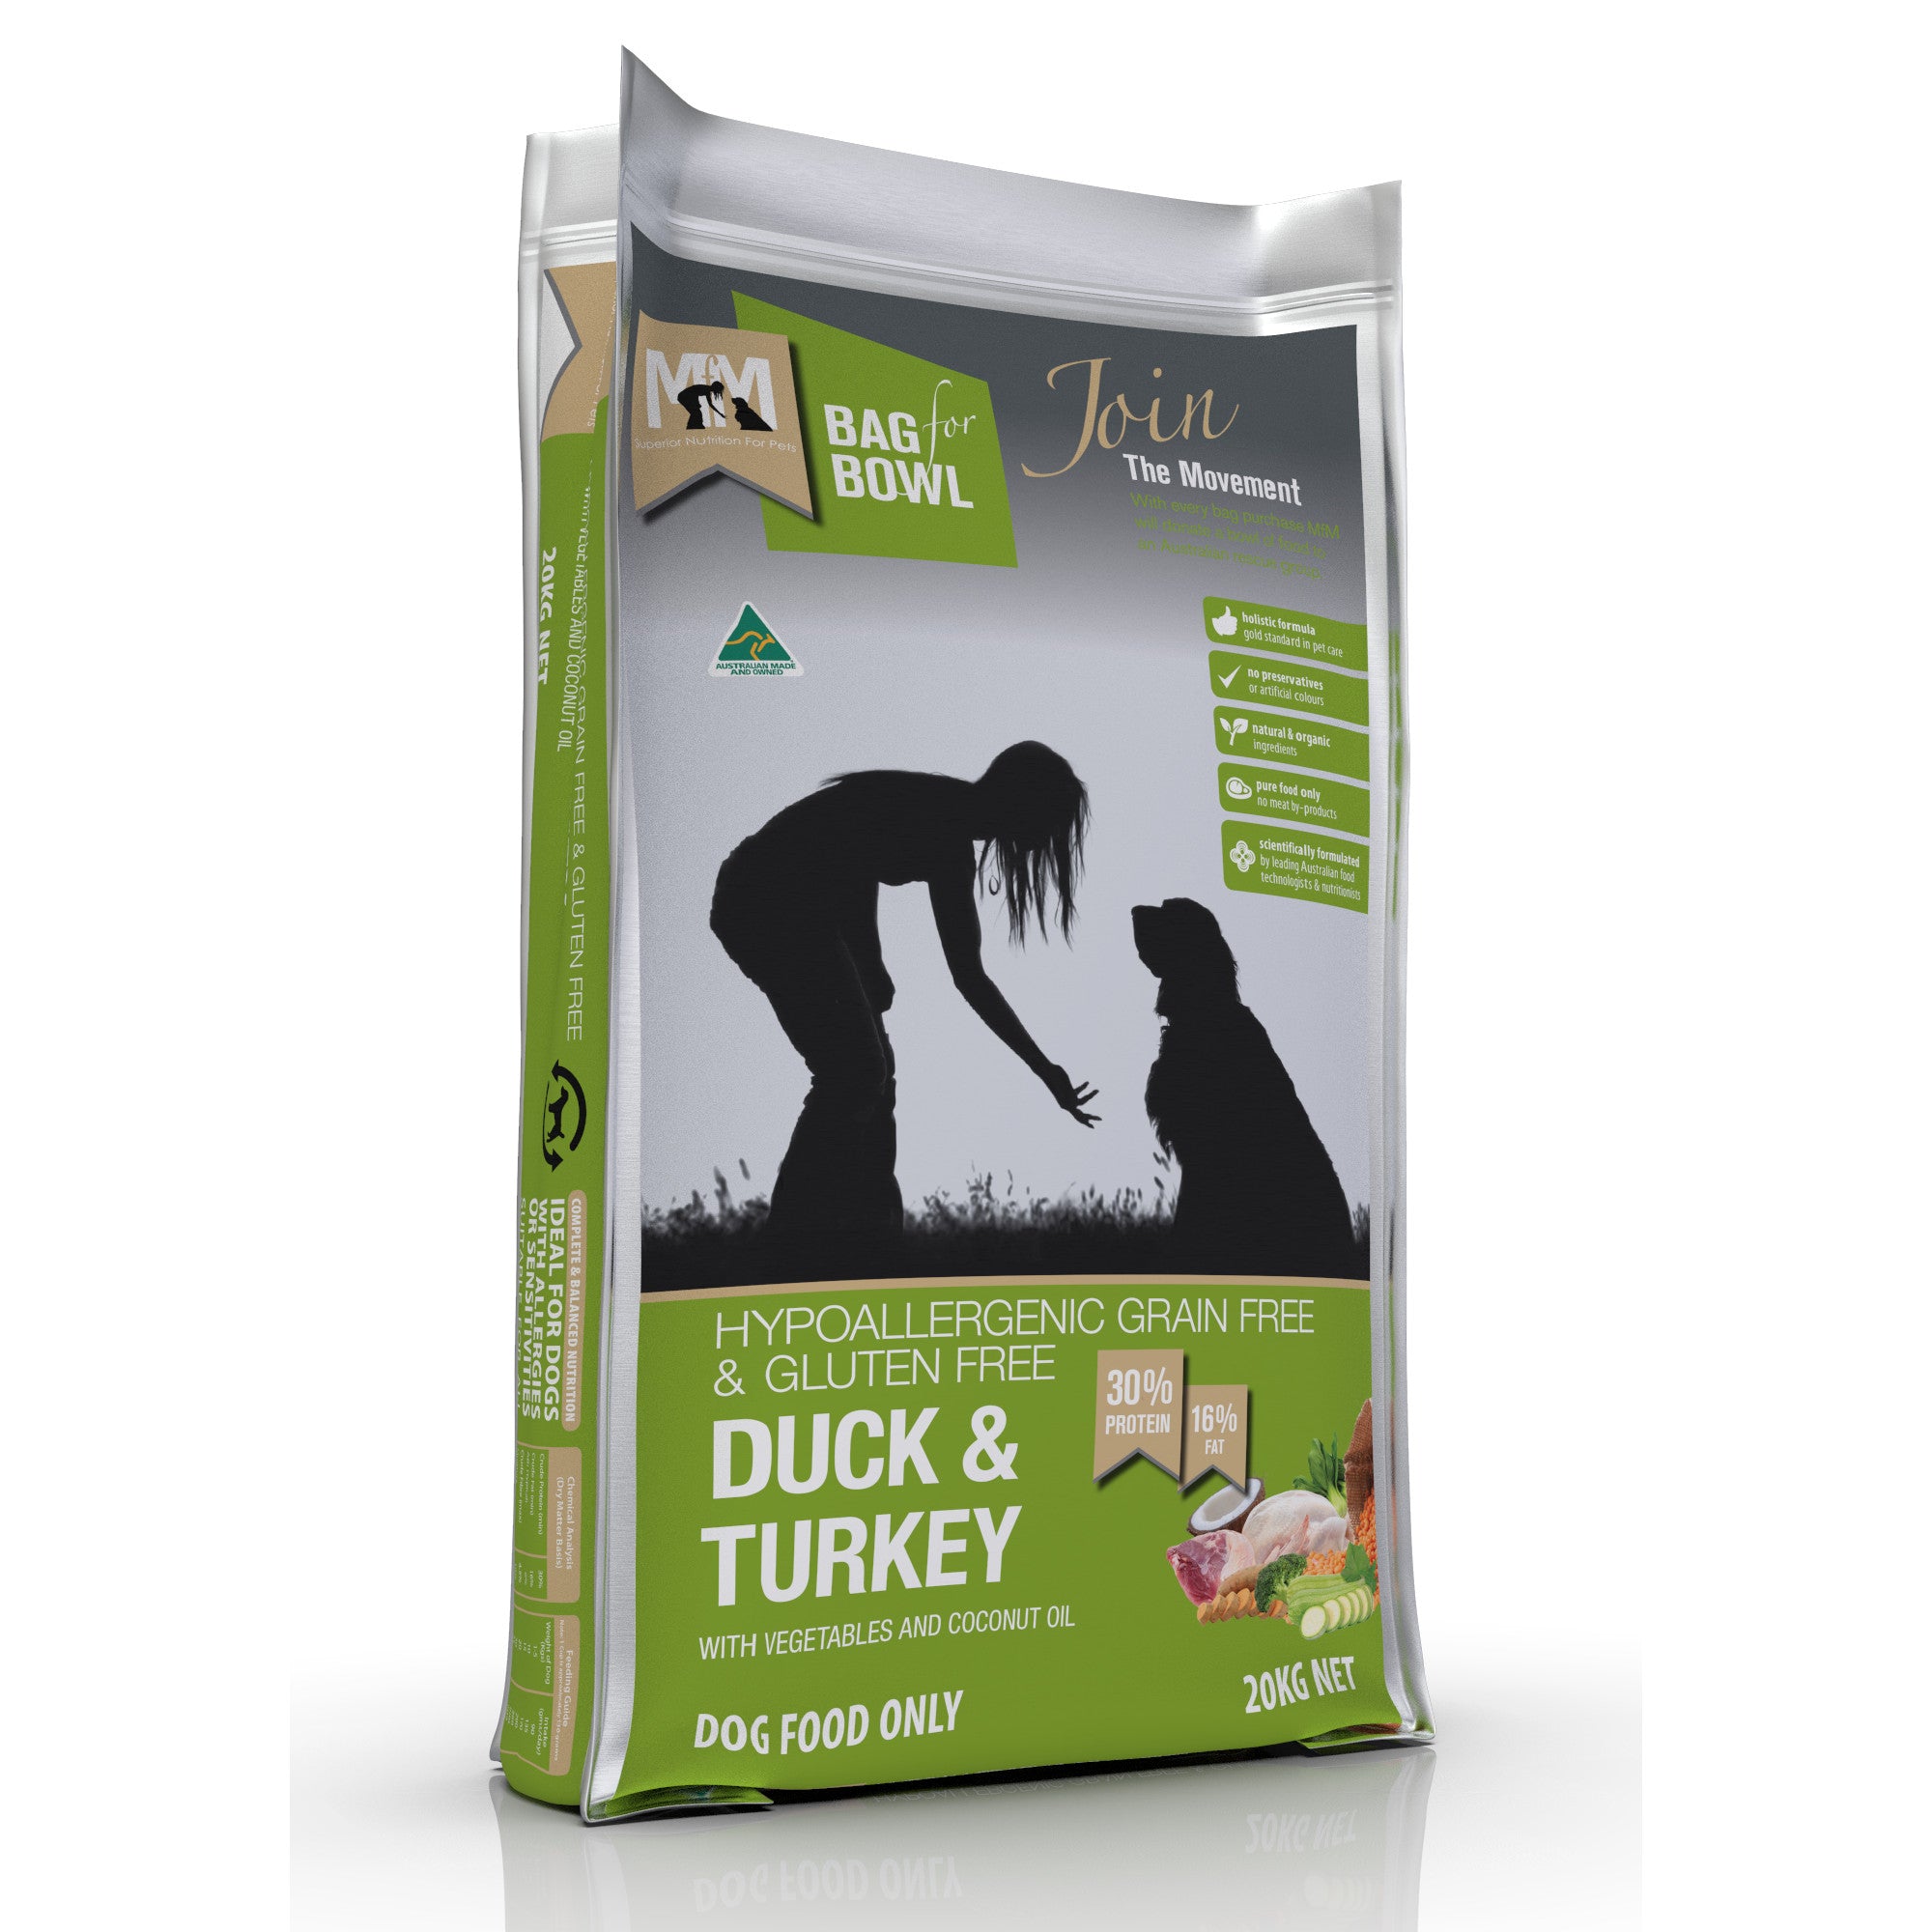 Meals for Mutts Grain Free Duck & Turkey Dog Food 20kg.